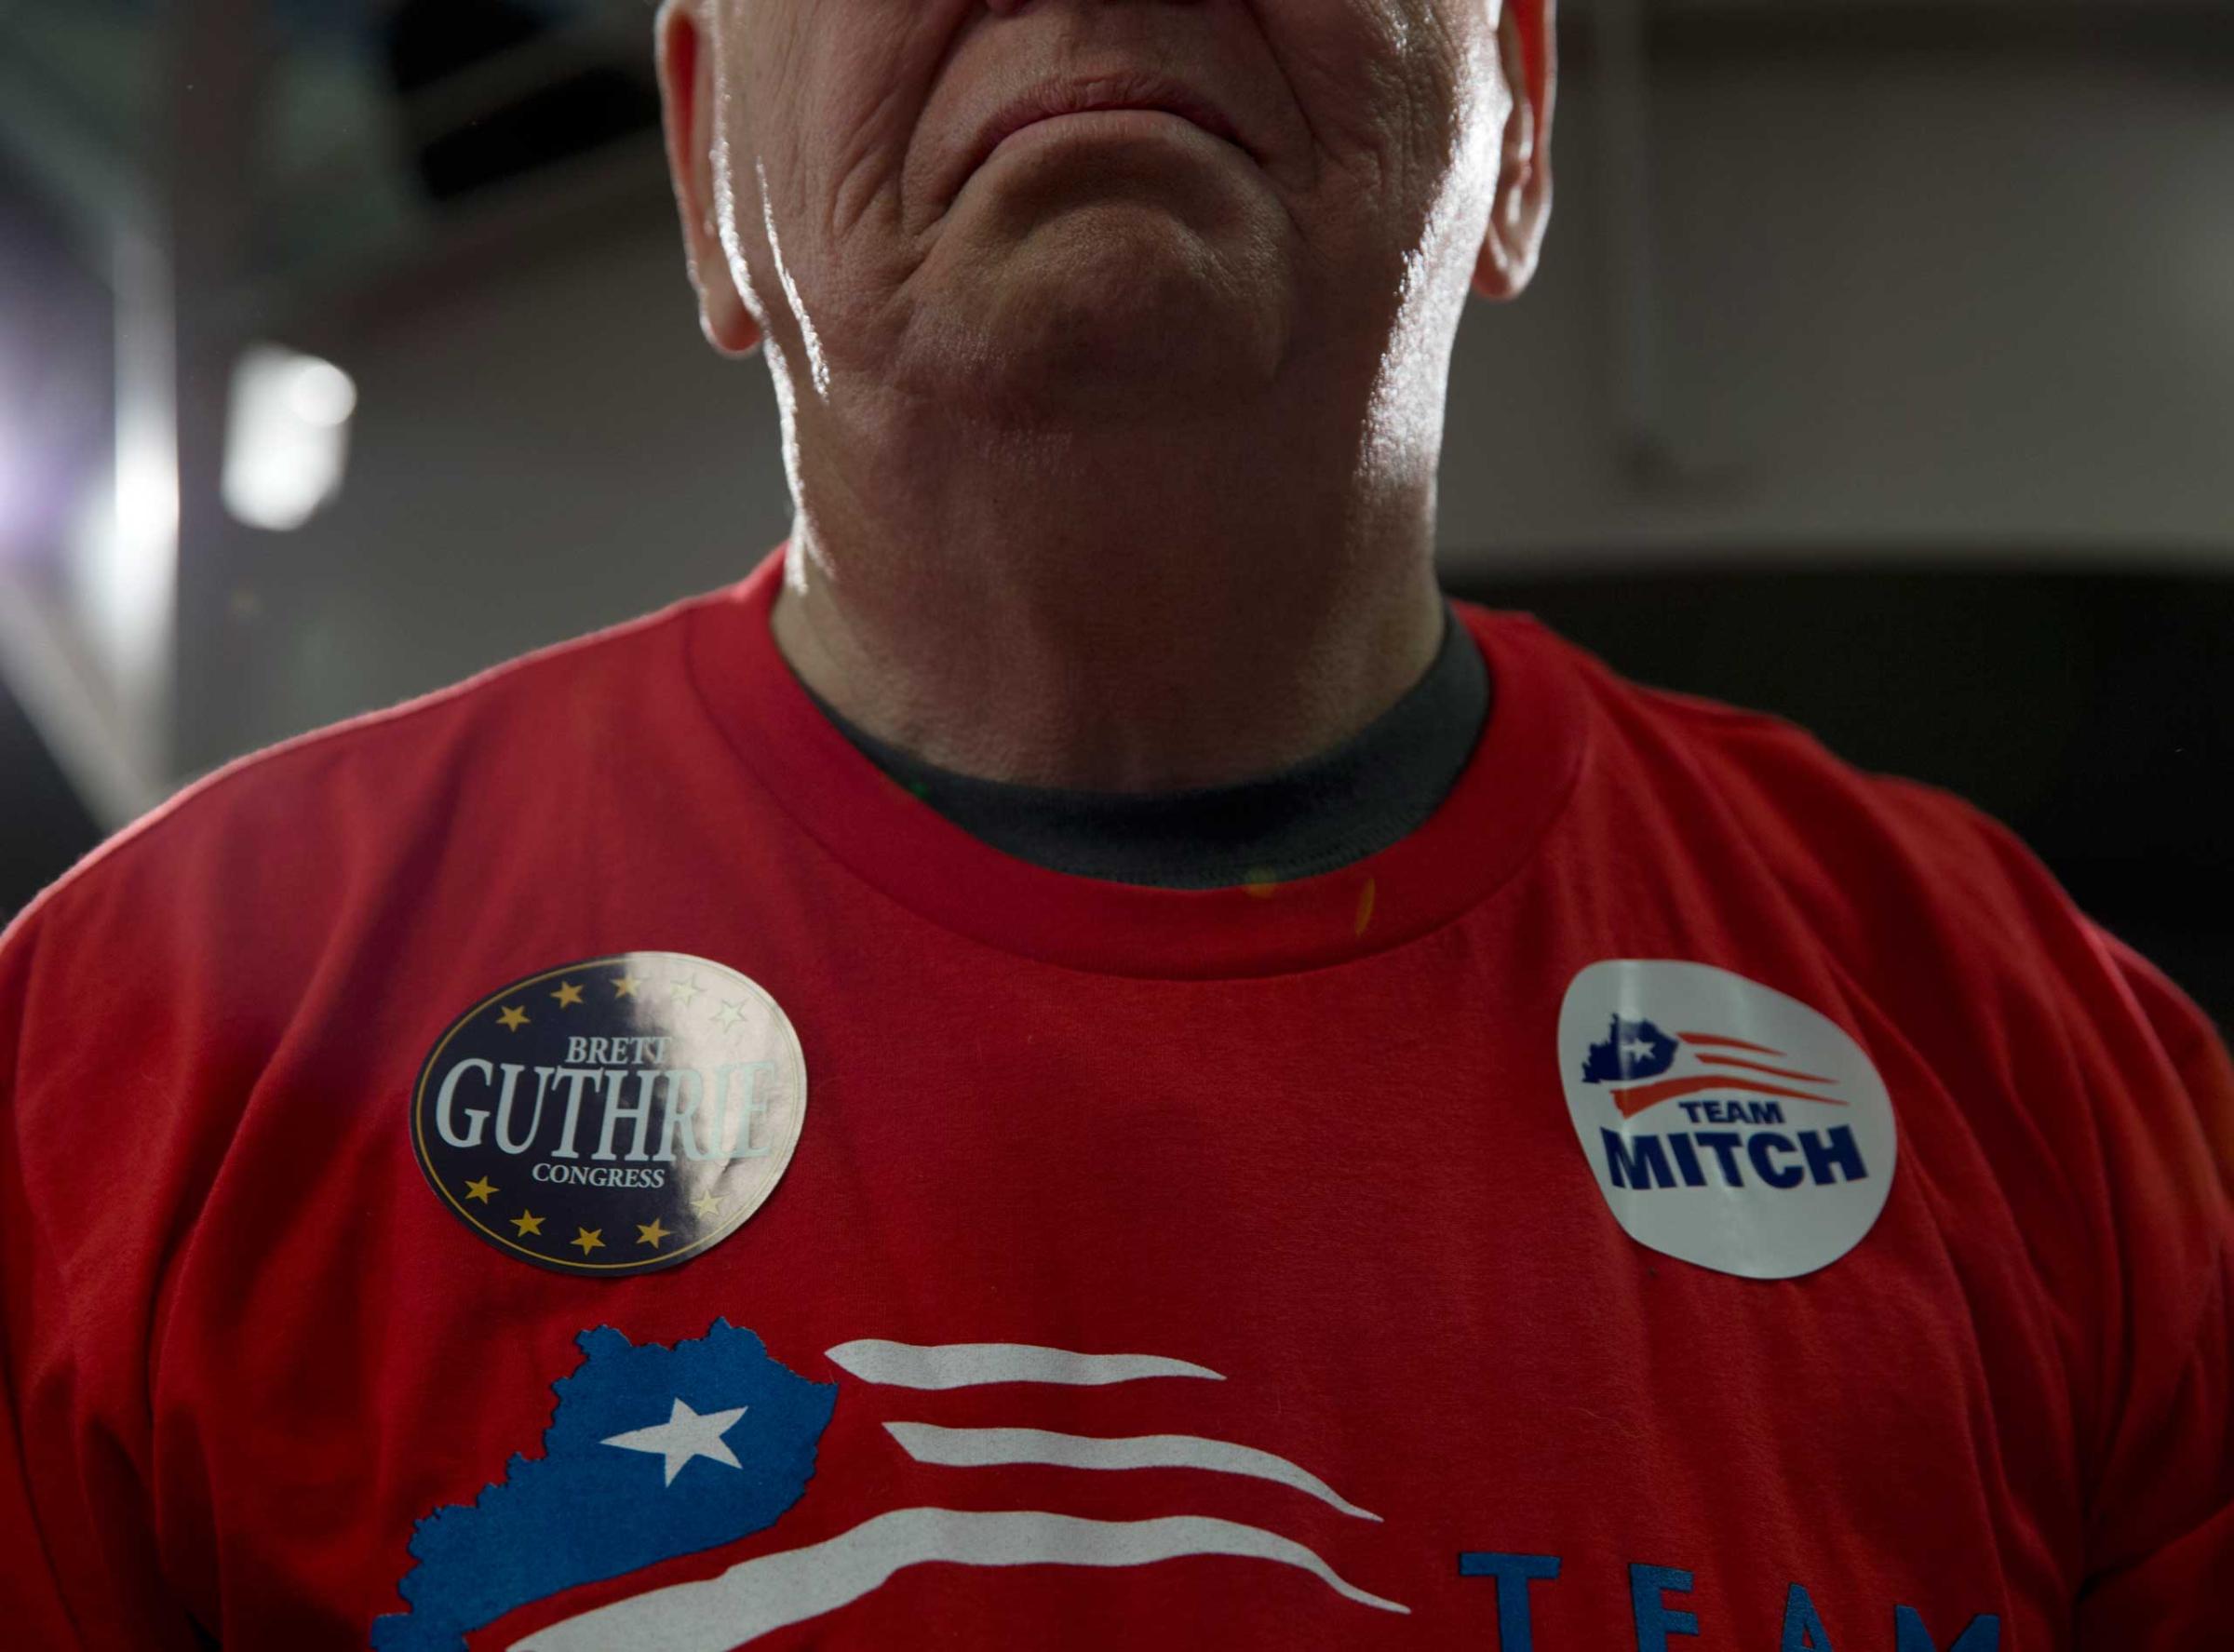 A supporter of Sen. Mitch McConnell is seen at a campaign rally at Bowling Green-Warren Co. Regional Airport in Bowling Green, Ky. on Nov. 3, 2014.